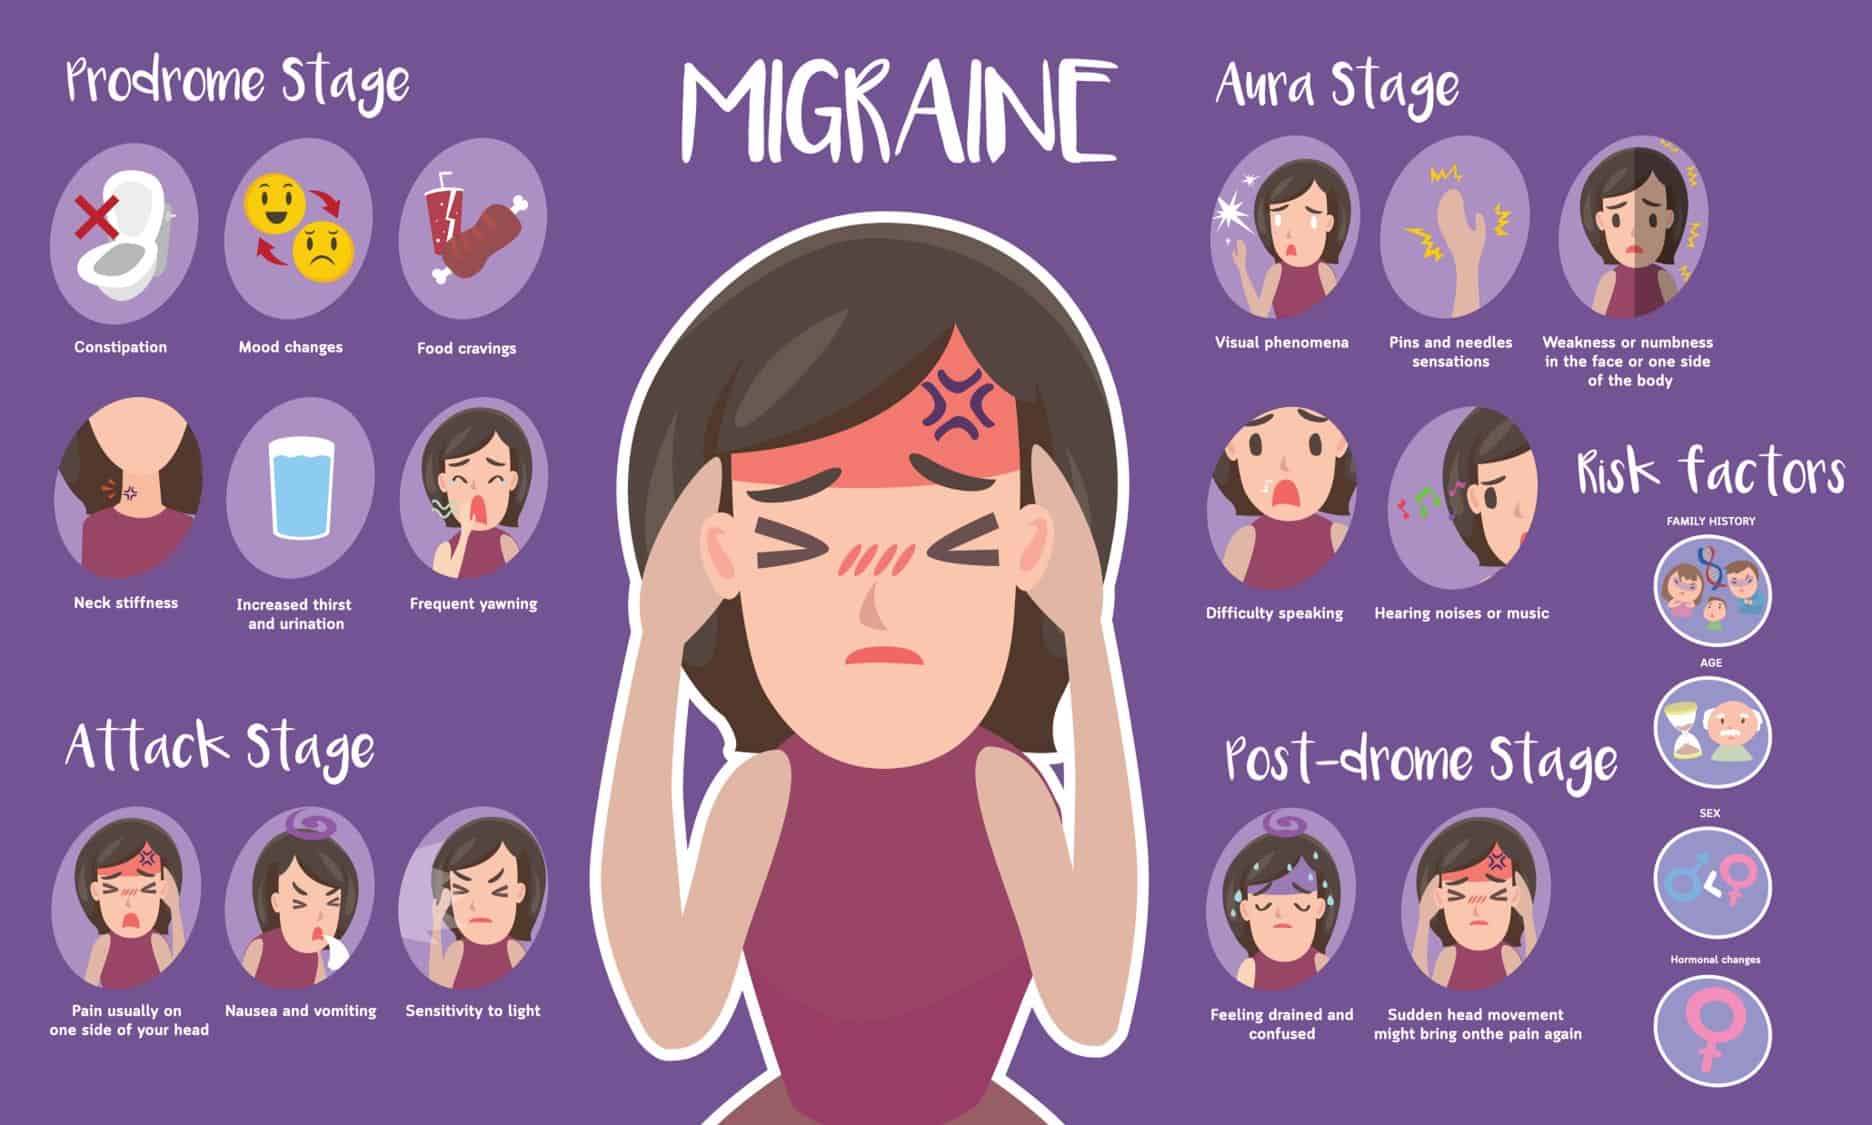 What is the starting point of migraine?